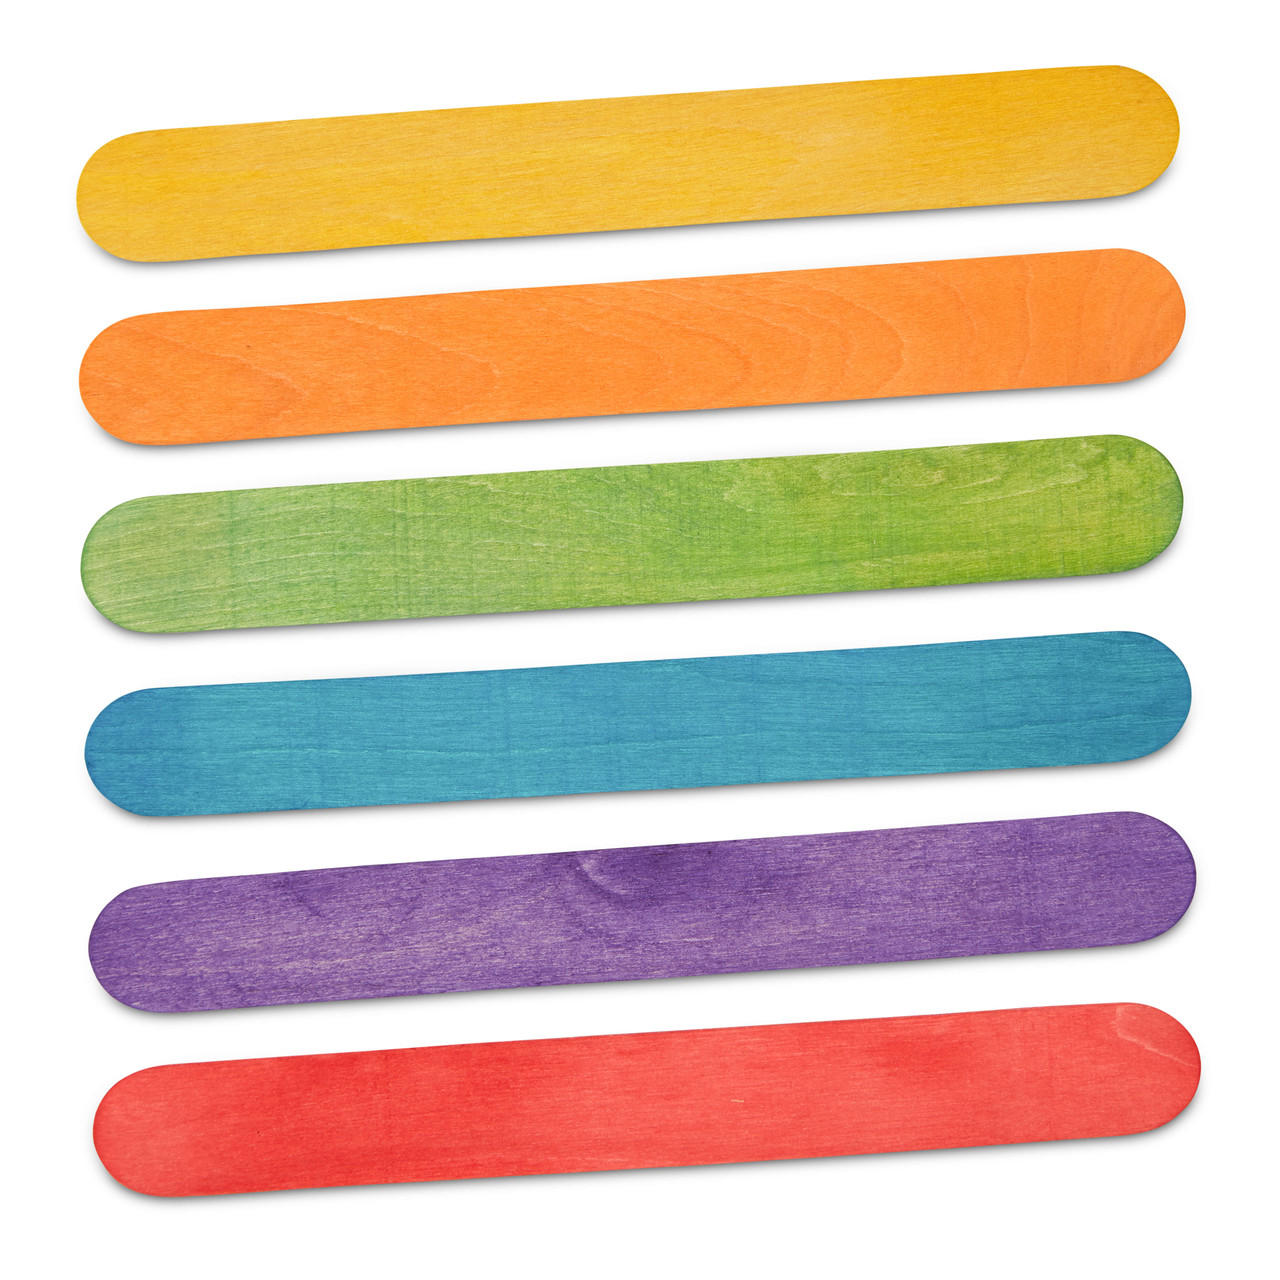 Jumbo Green Craft Sticks 6, Large Popsicle Sticks for Crafts, Woodpeckers